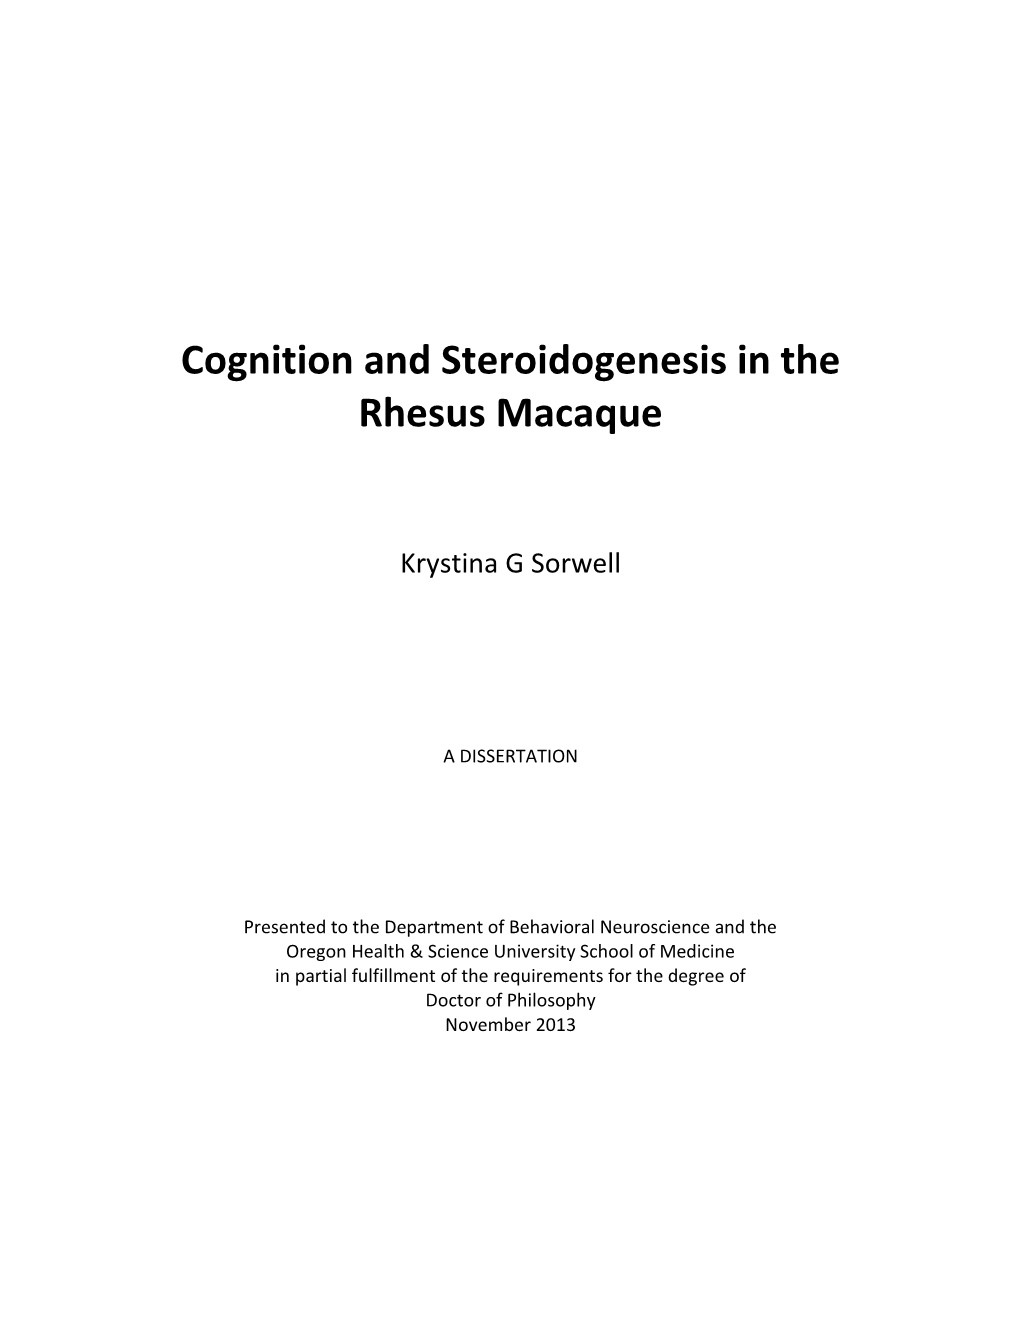 Cognition and Steroidogenesis in the Rhesus Macaque